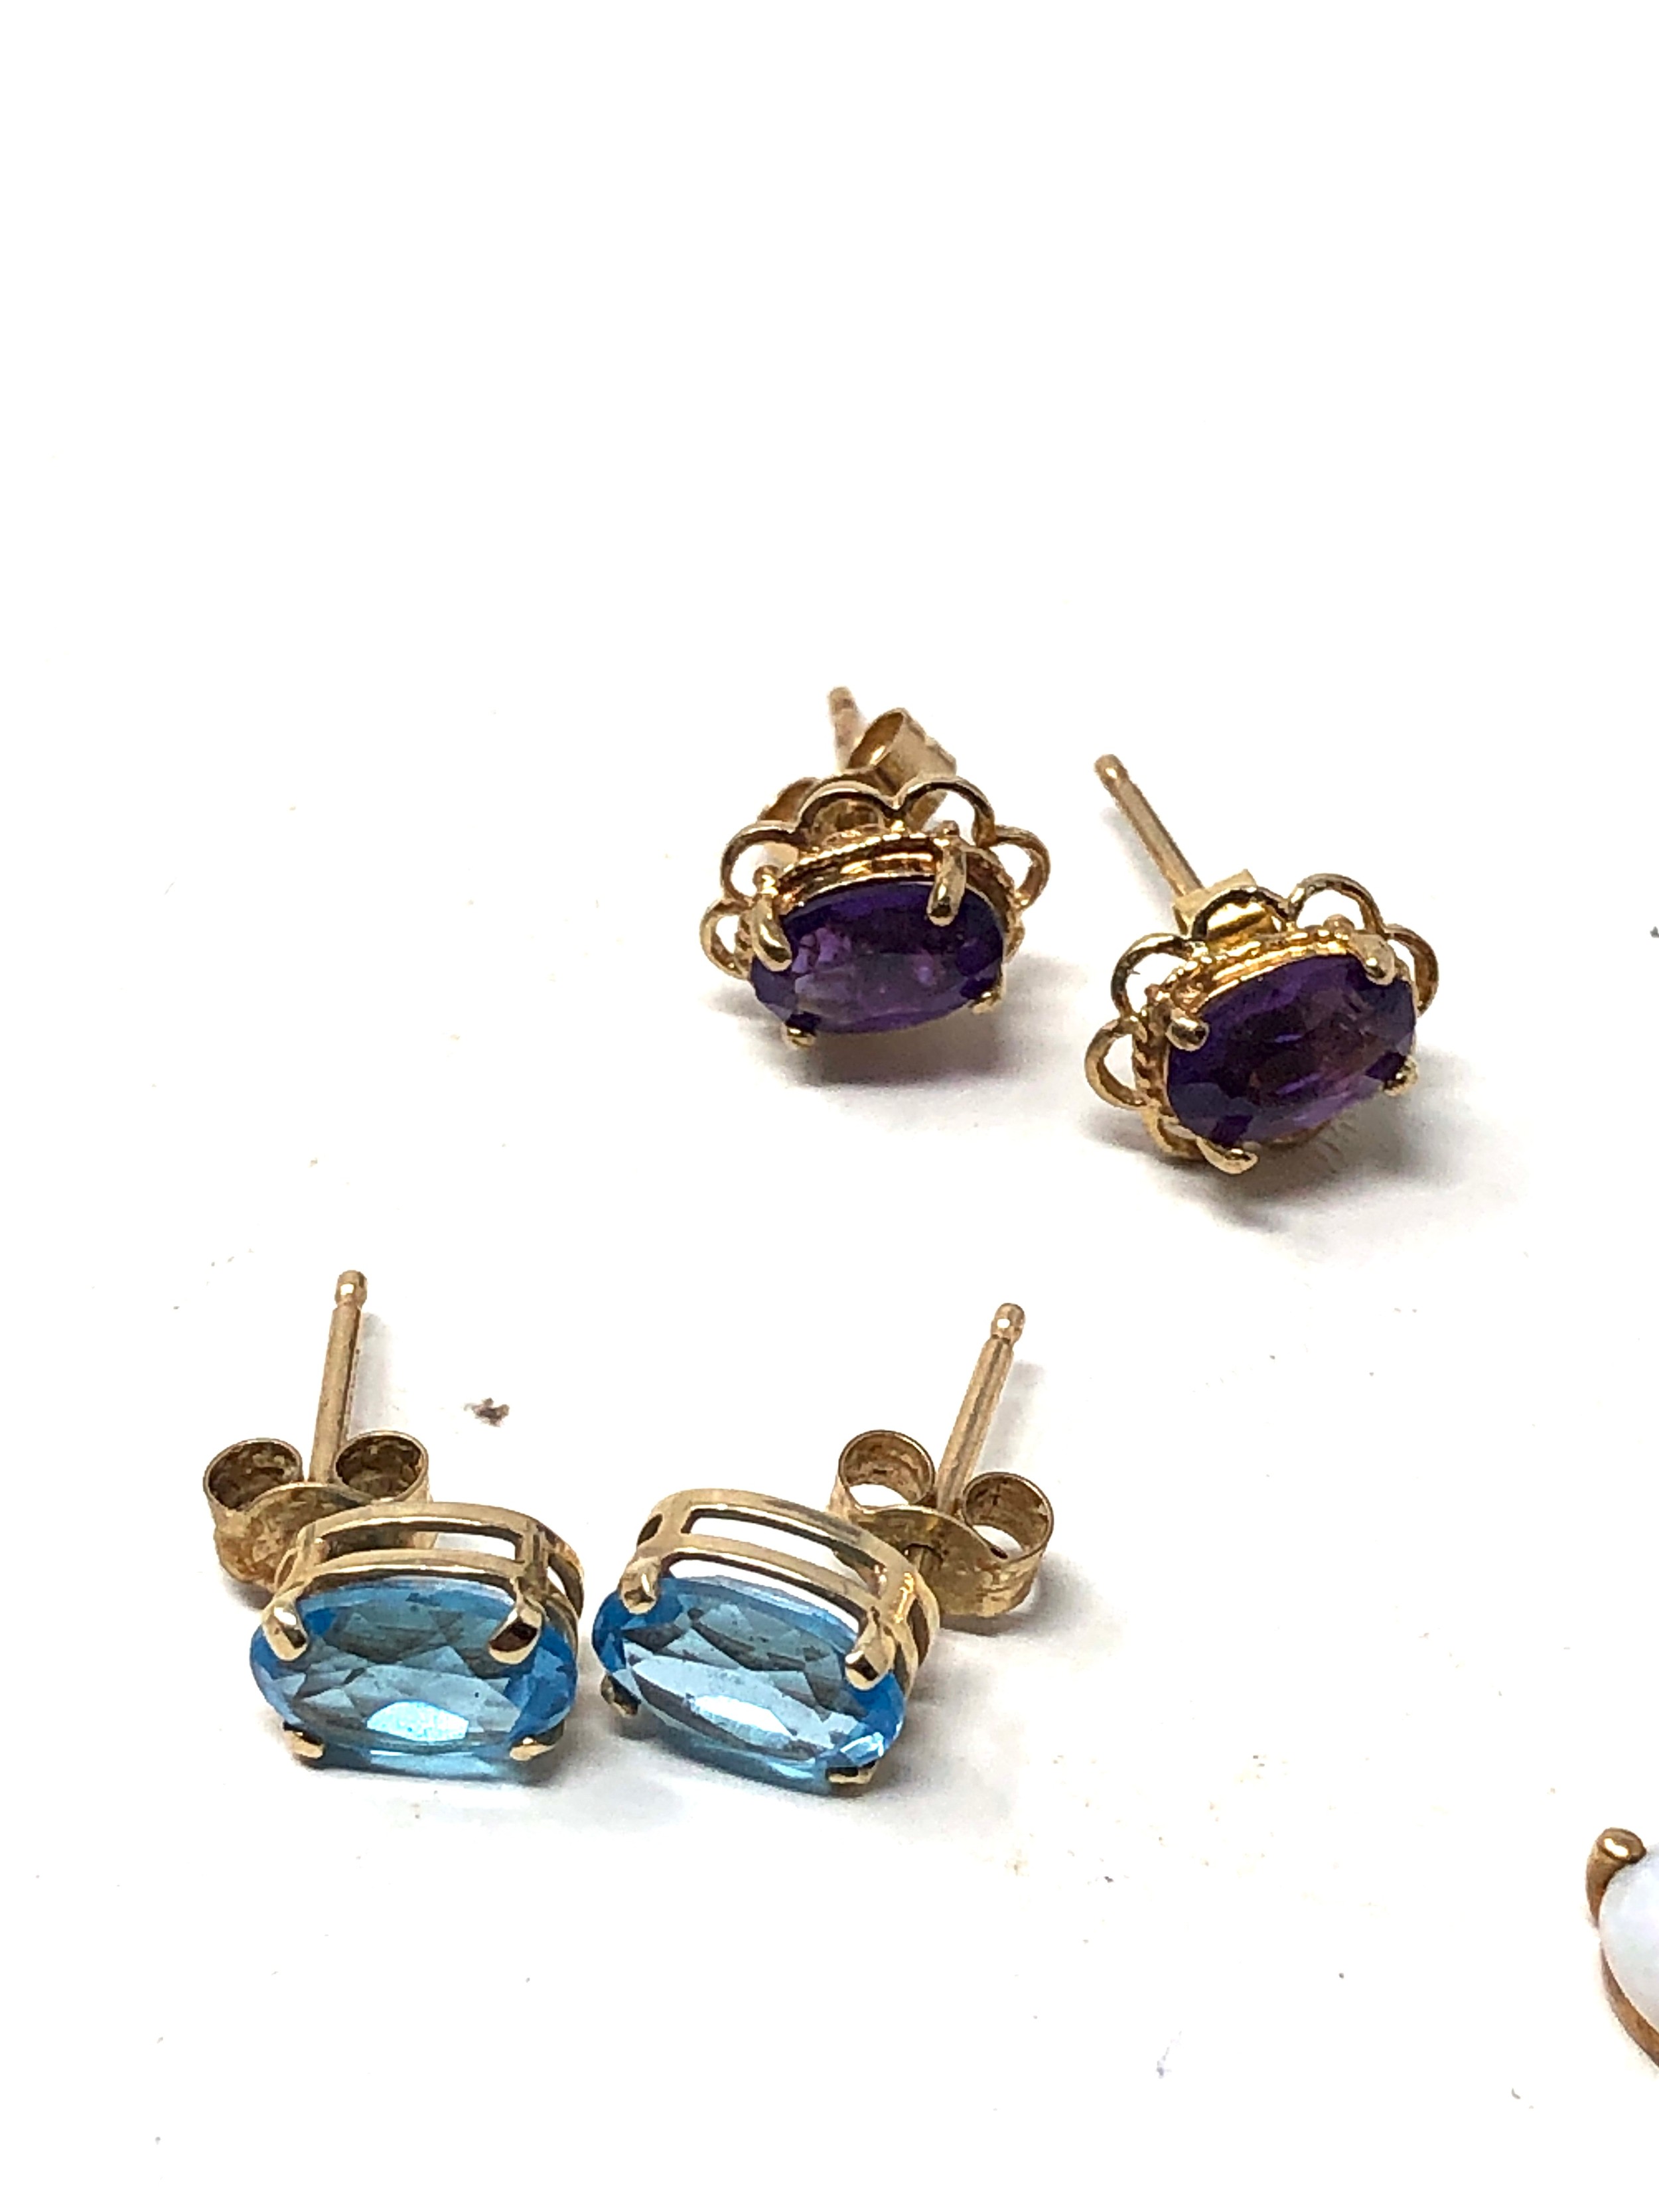 3 x 9ct gold paired gemstone stud earrings inc. amethyst & sapphire - Image 3 of 3